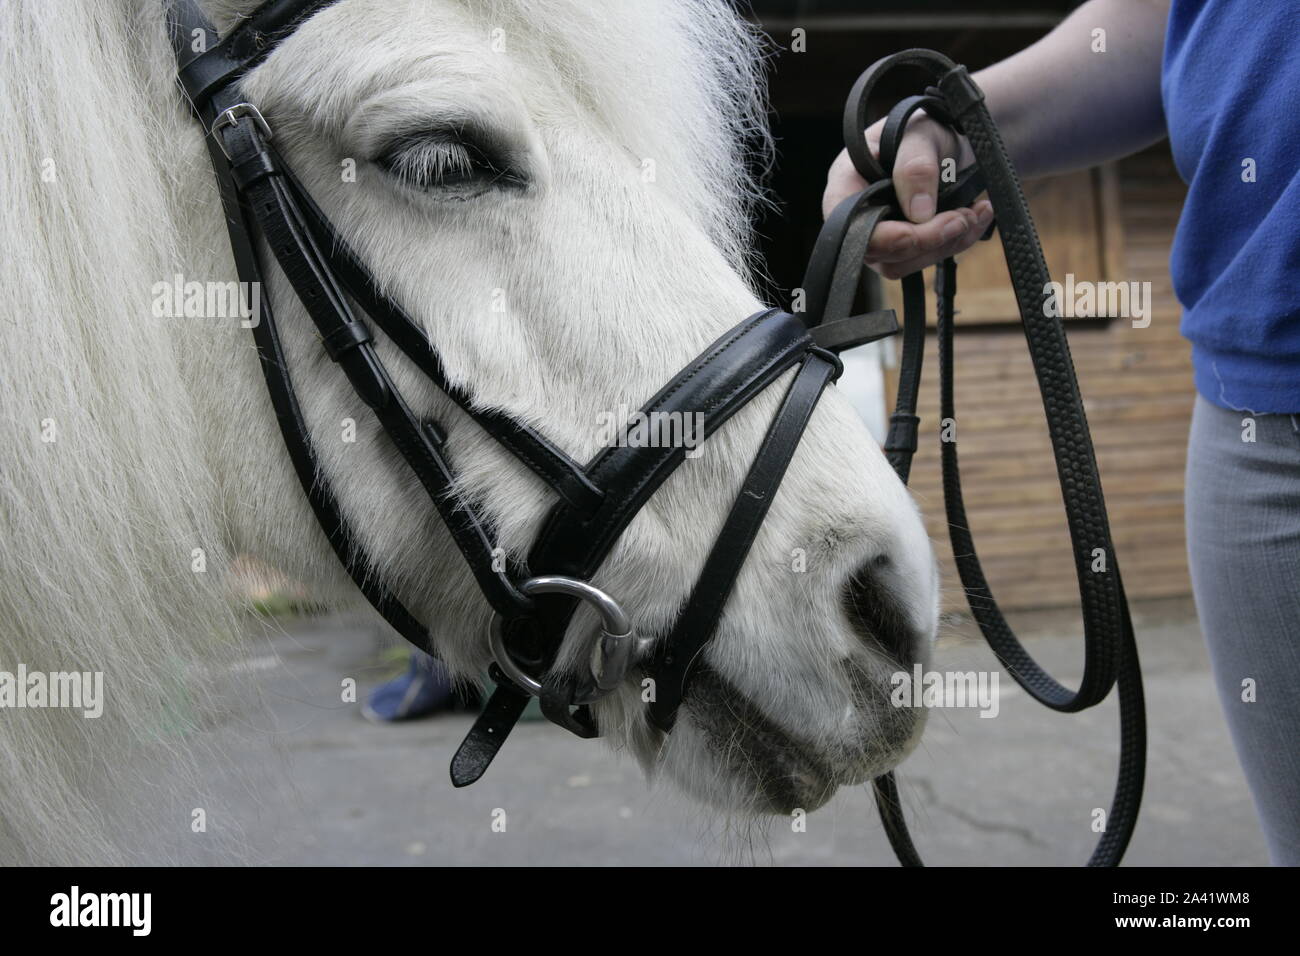 White Shetland Pony with Bridle, Bit and Reins Stock Photo